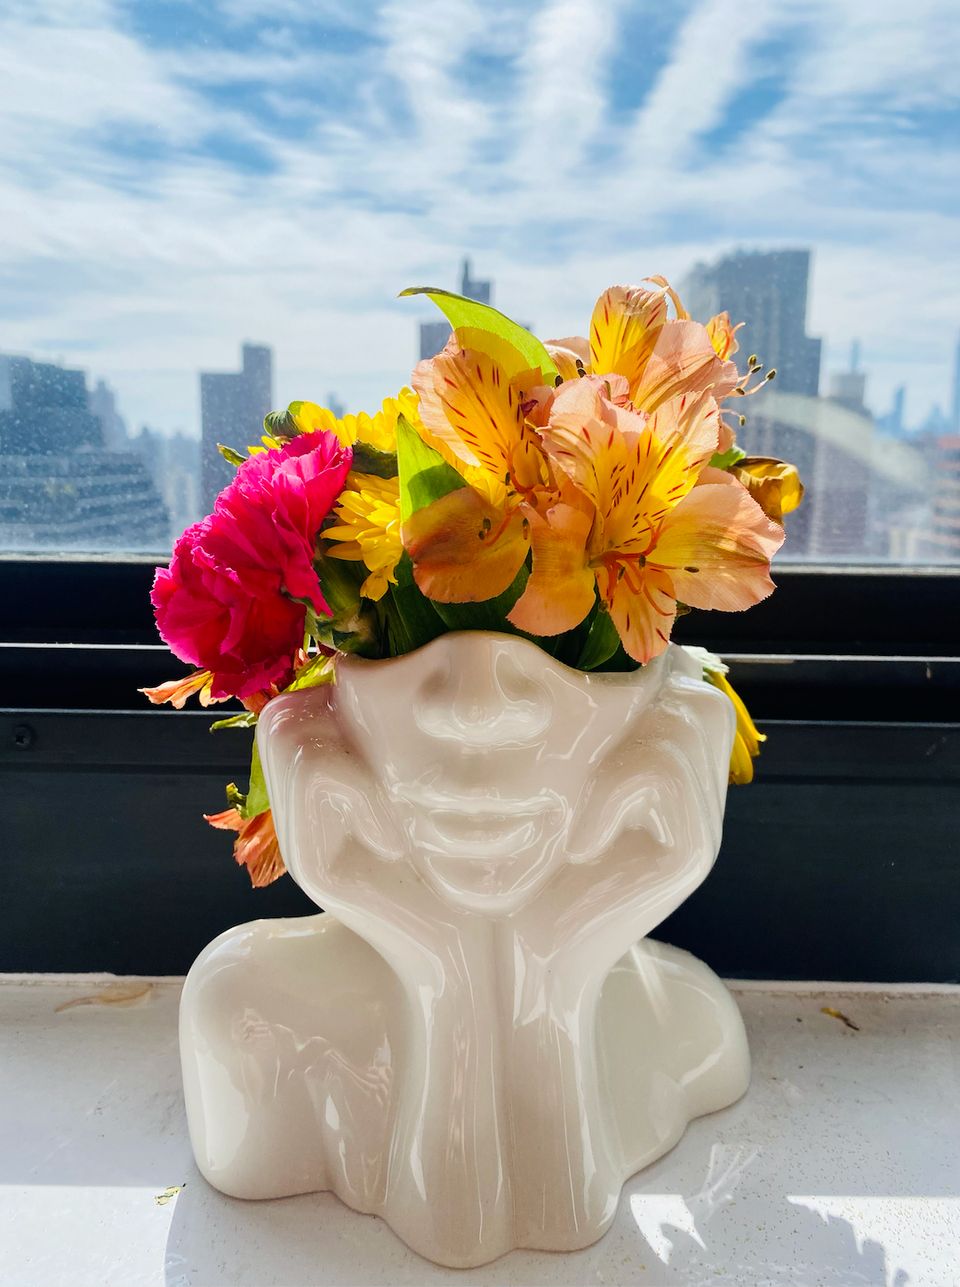 A thoughtful face vase perfect for daydreamers